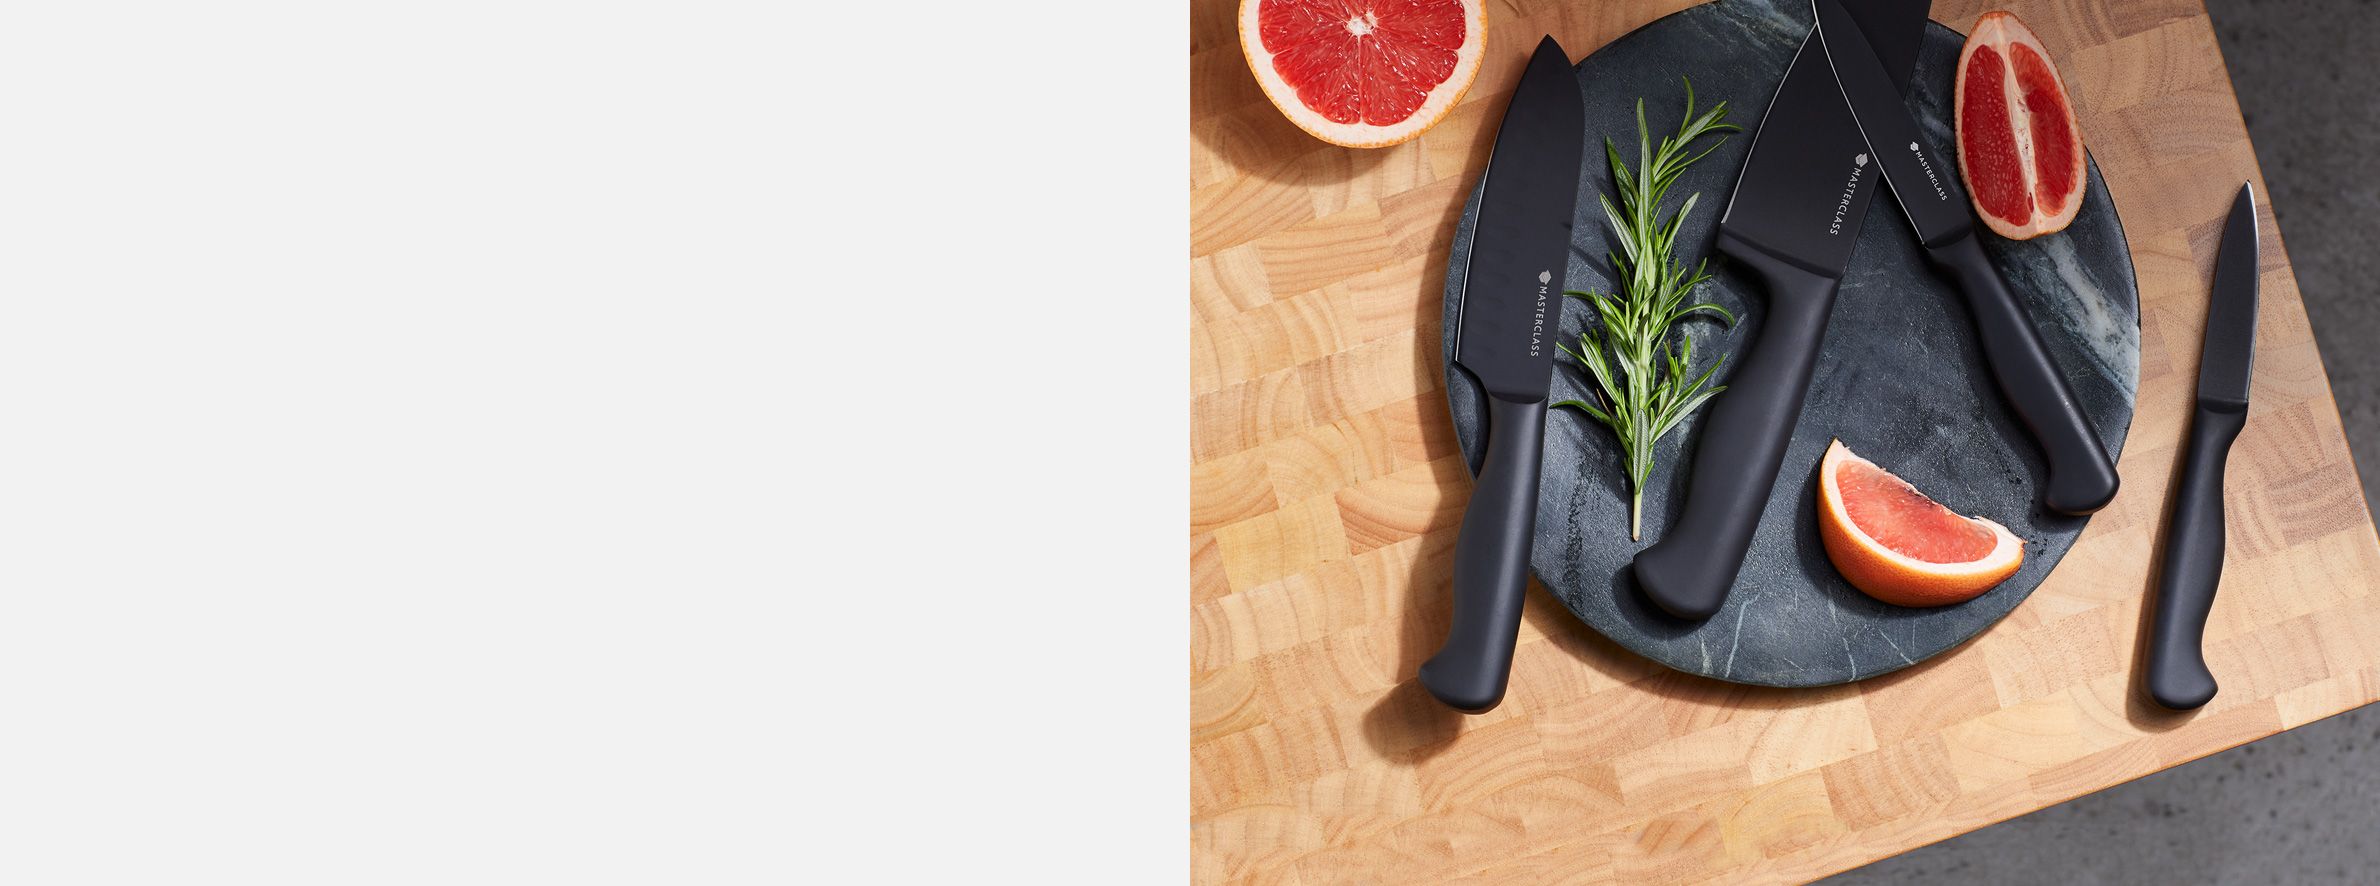 Kitchen knives available in John Lewis & Partners shops